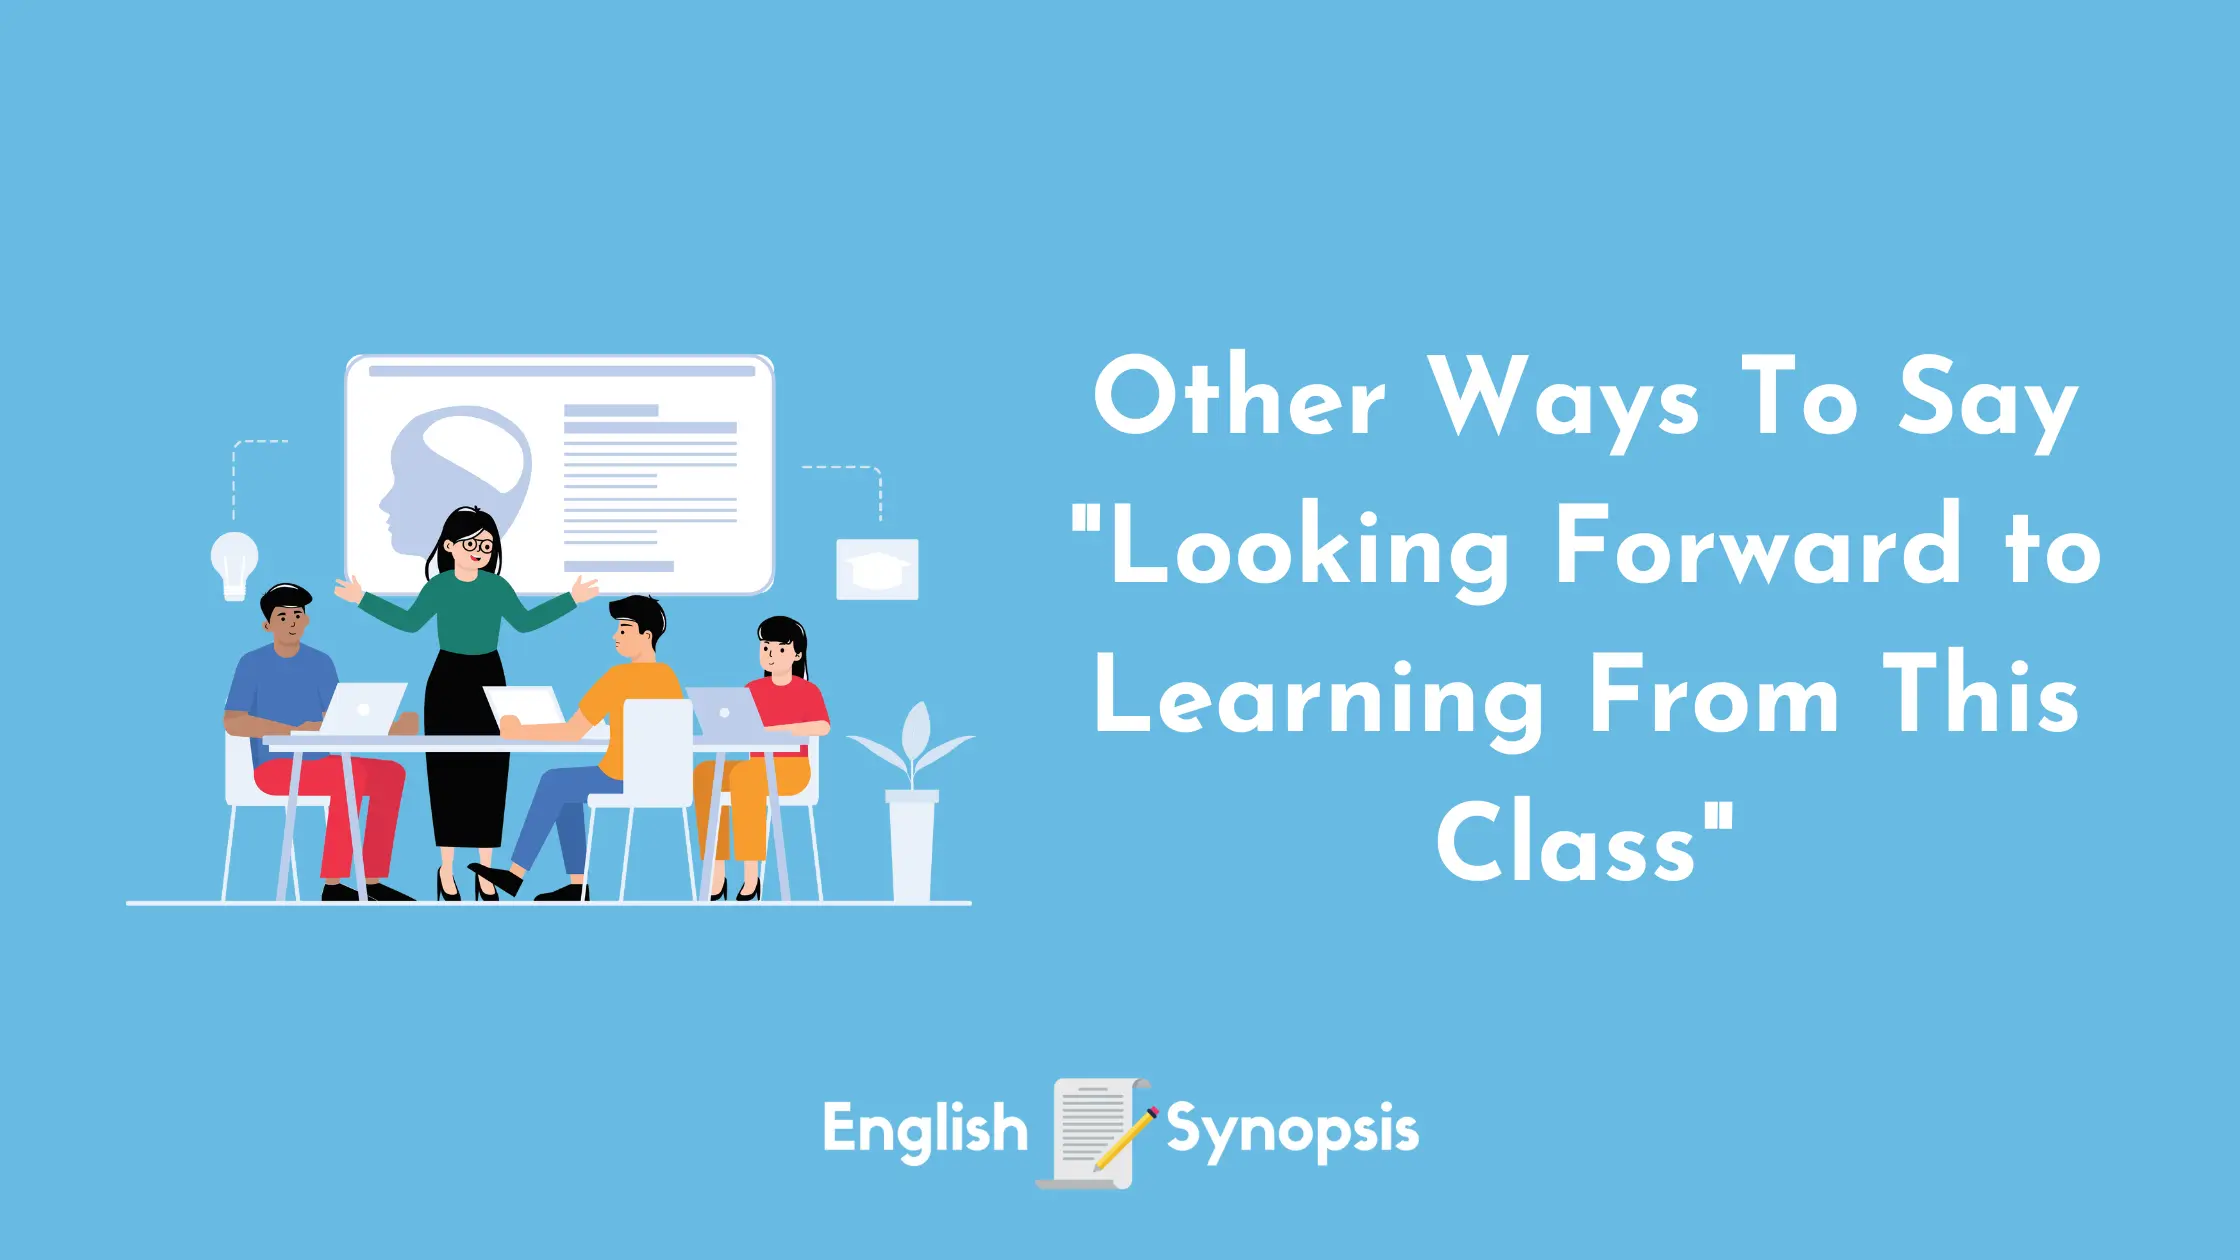 Other Ways To Say "Looking Forward to Learning From This Class"